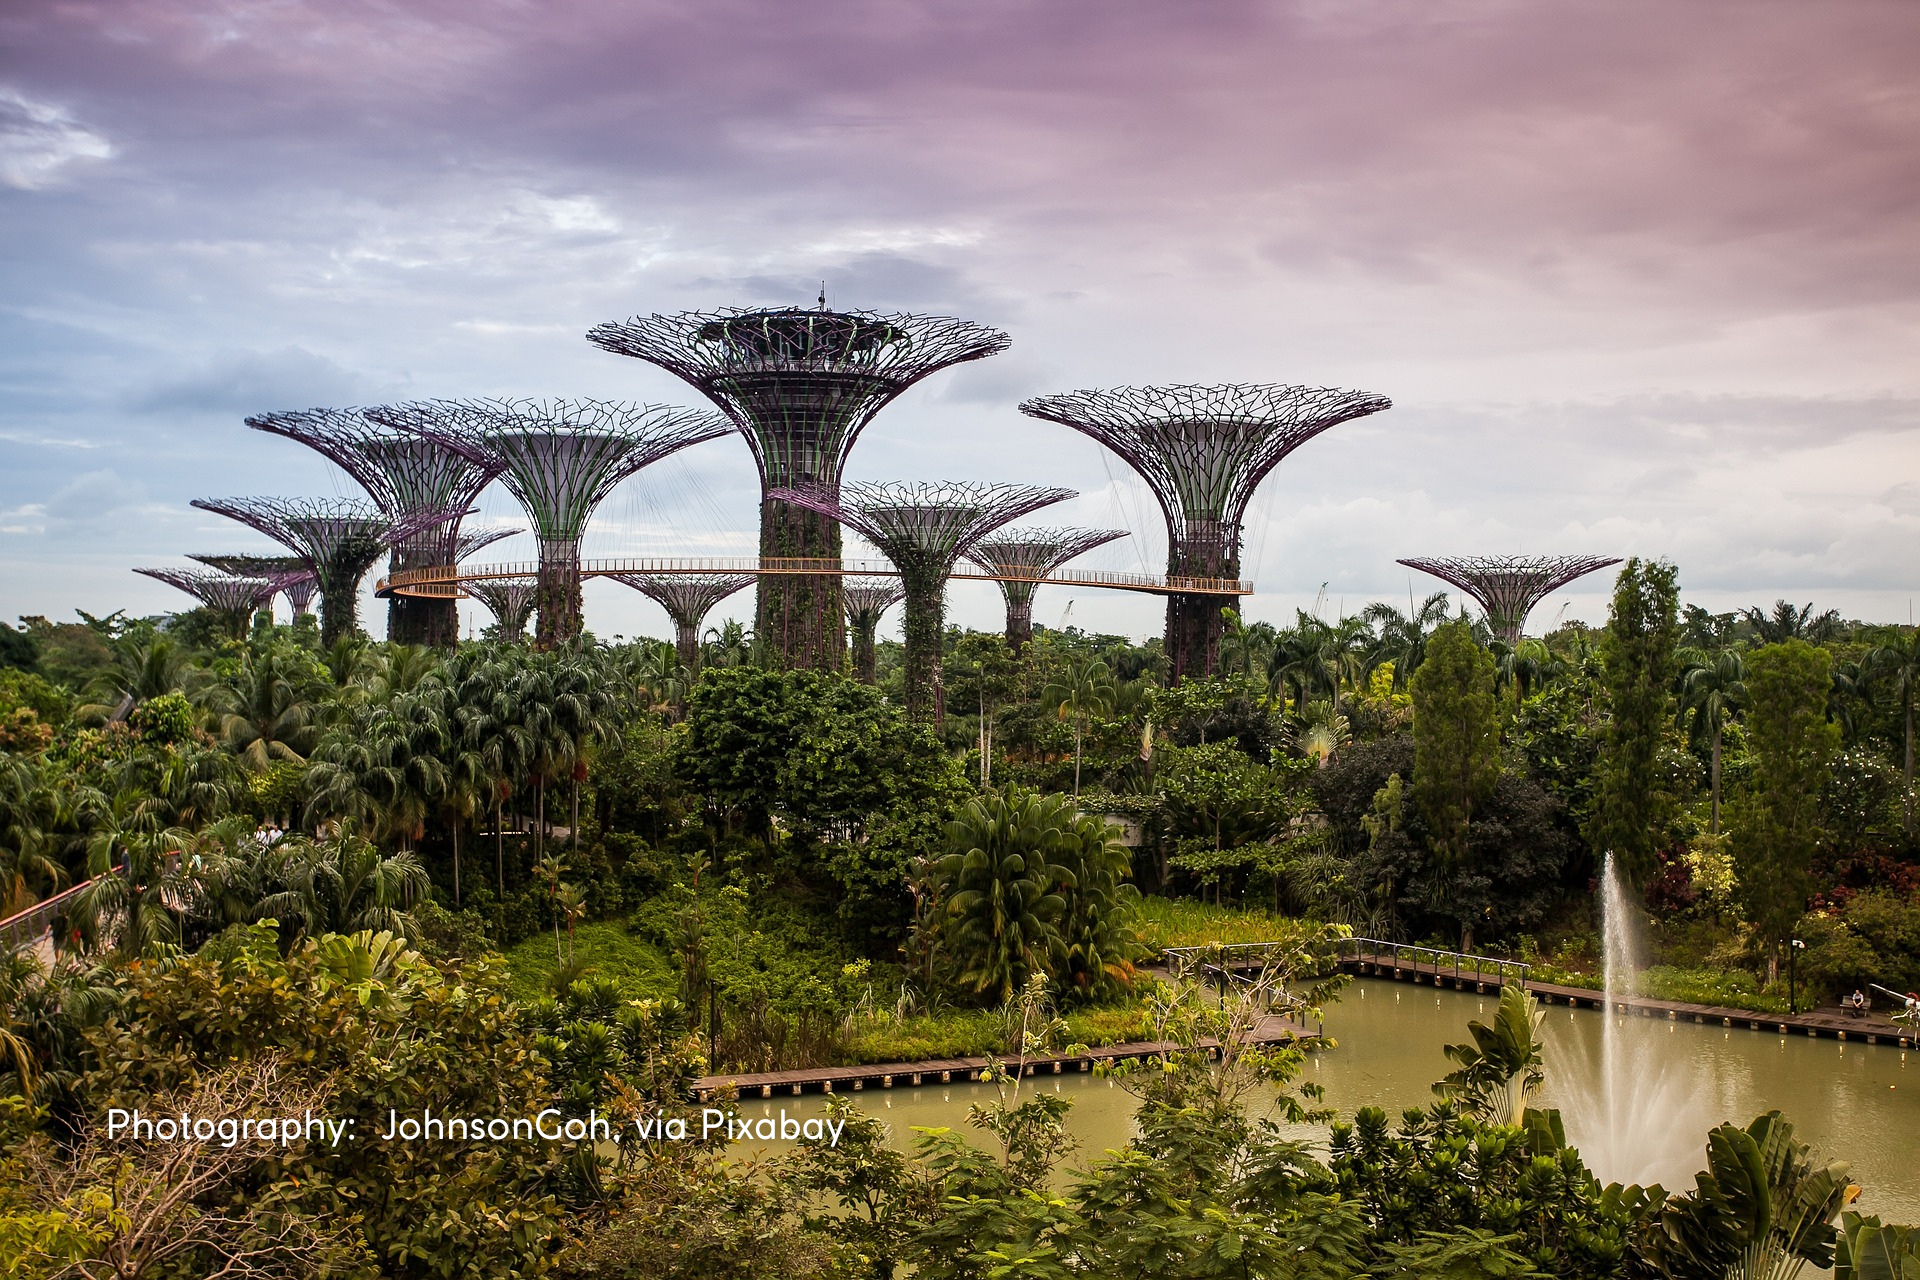 Biophilic Architecture to the Rescue of Human Well-Being